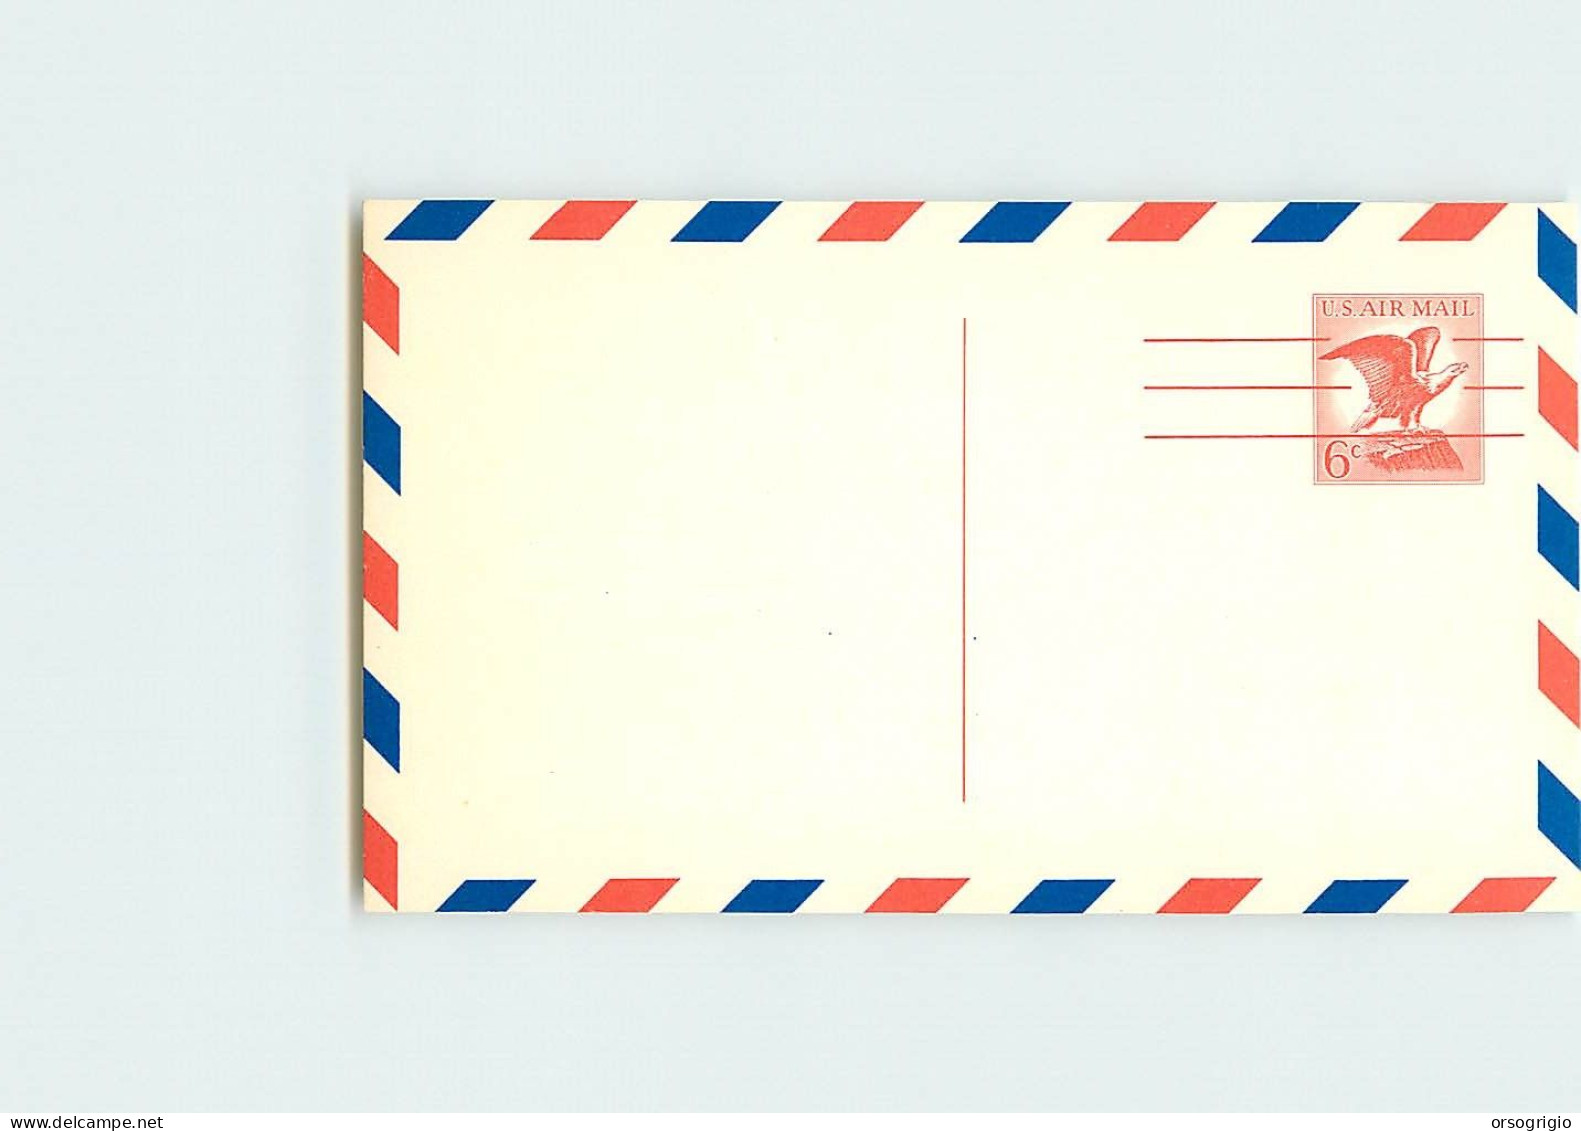 USA - Intero Postale - Stationery - AIR MAIL 6 Cents - 1961-80